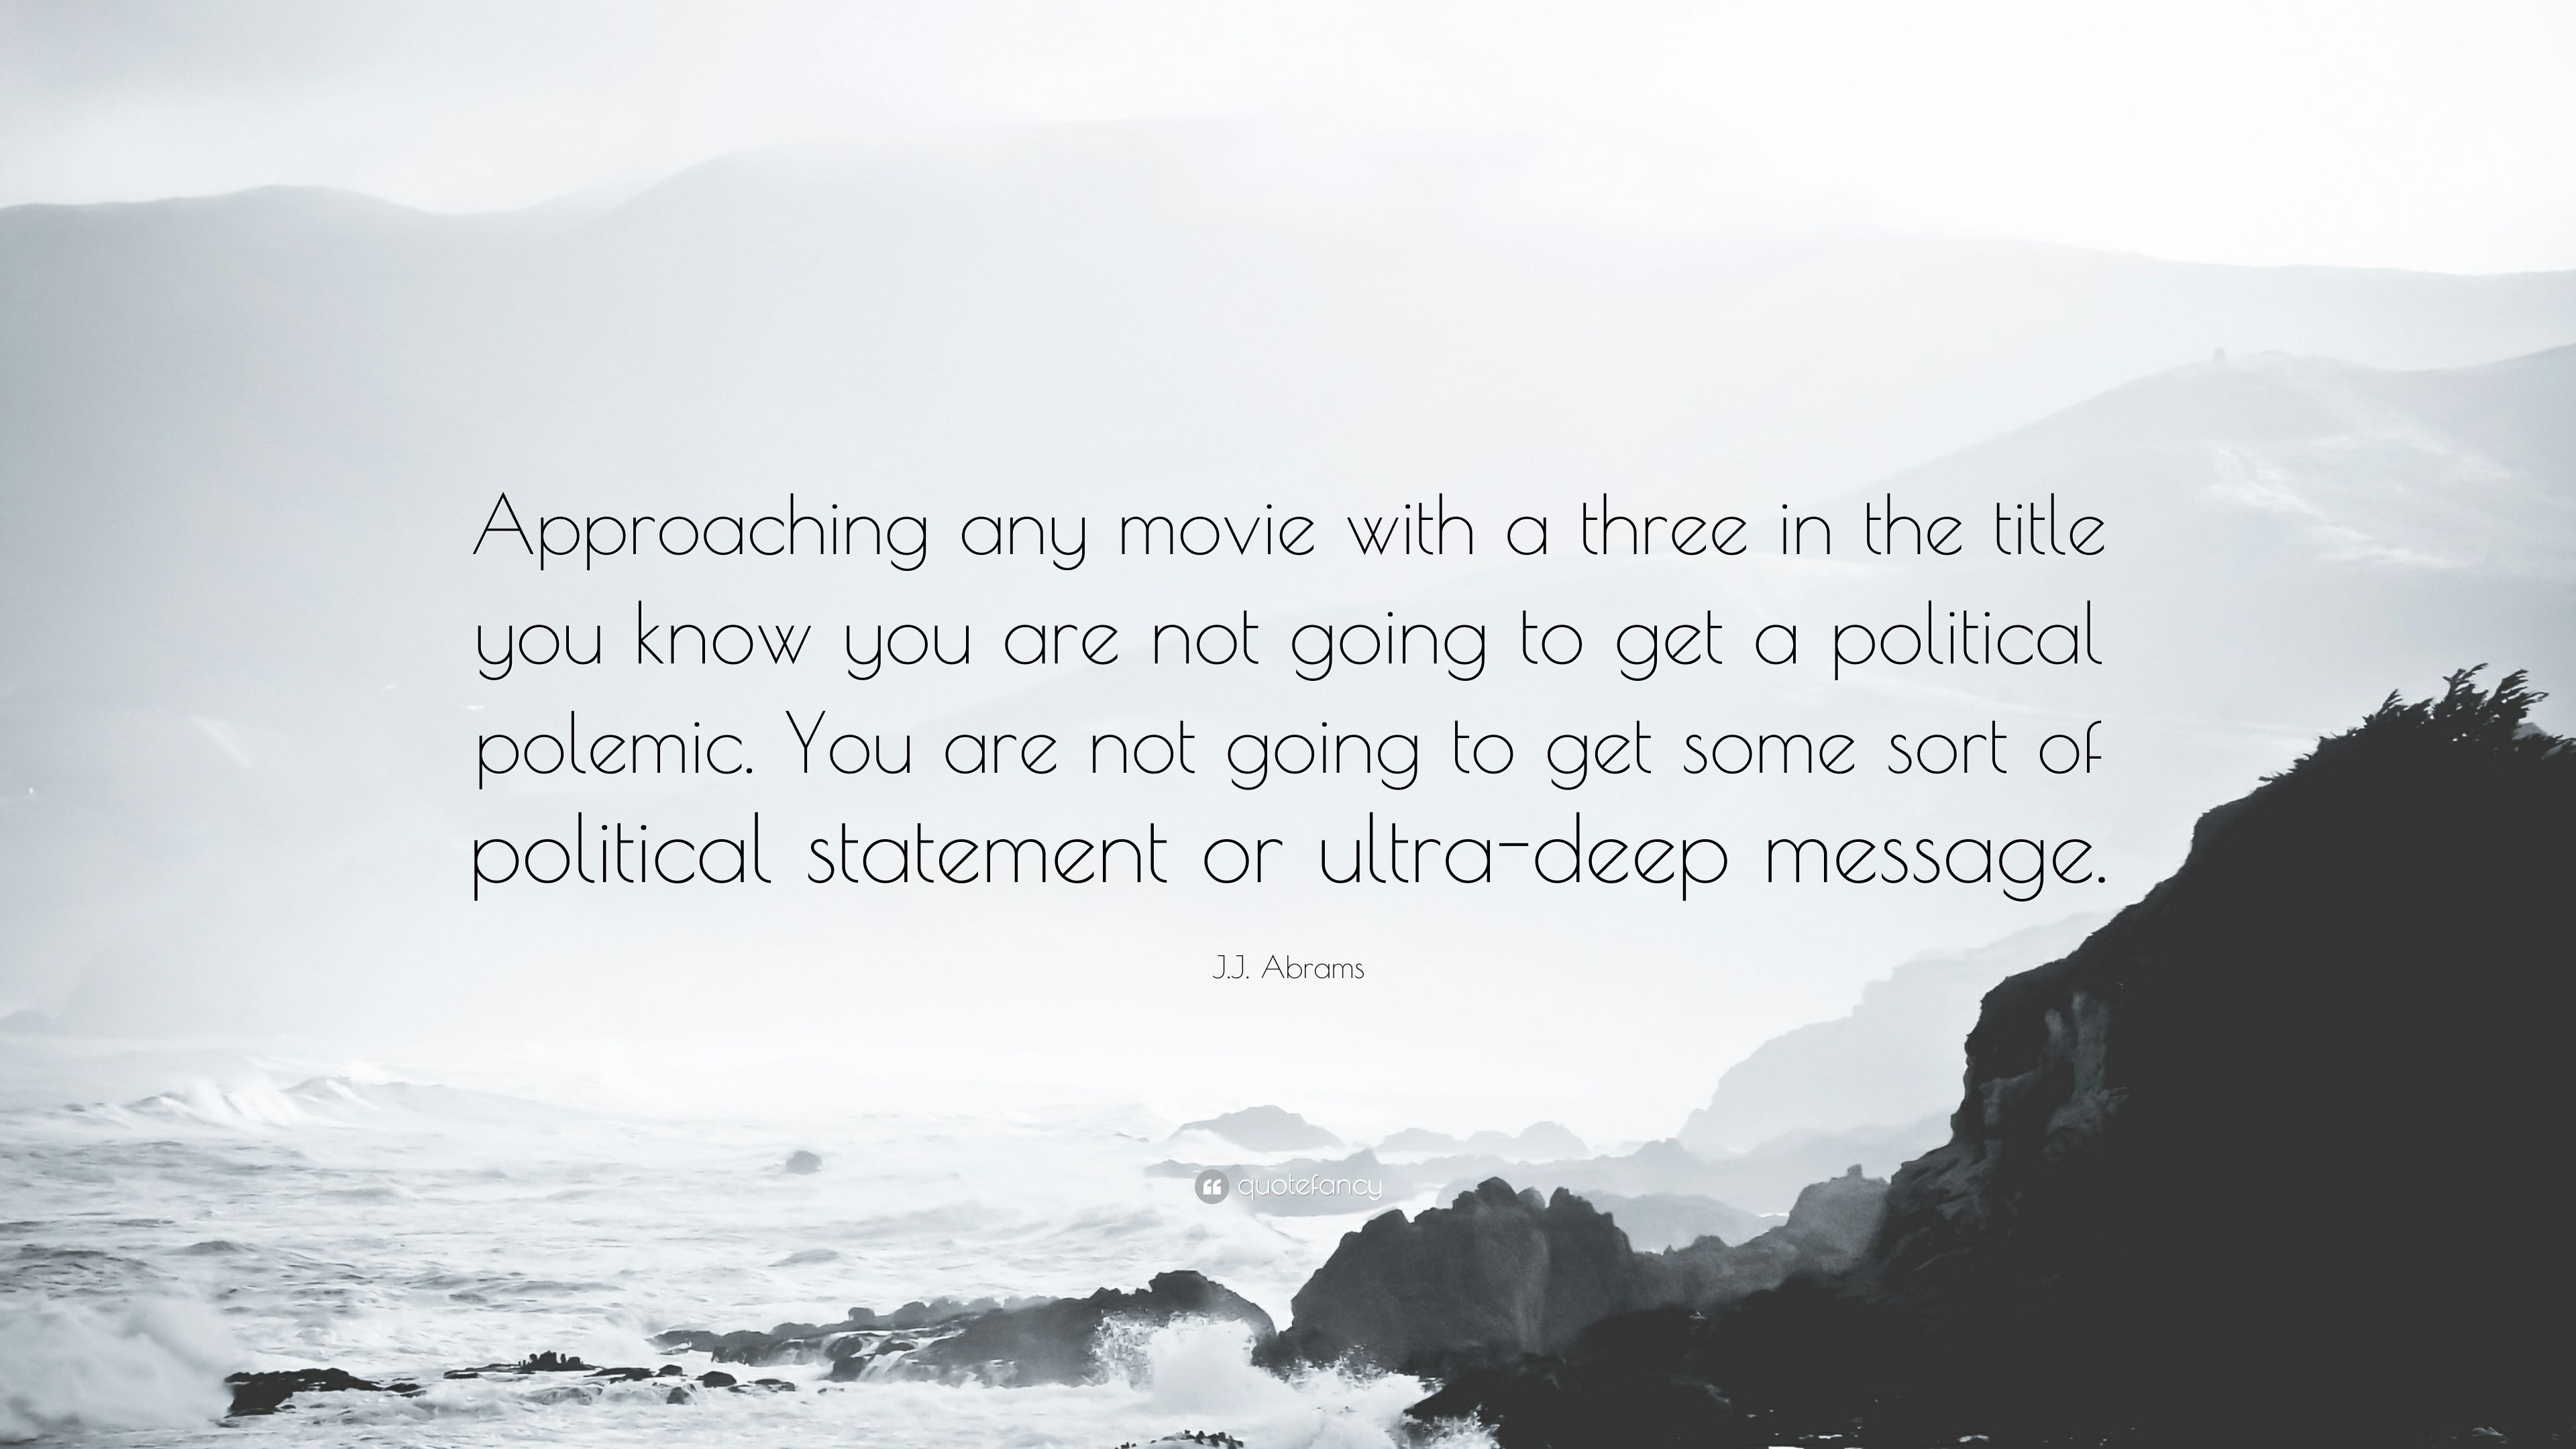 J.J. Abrams Quote: “Approaching any movie with a three in